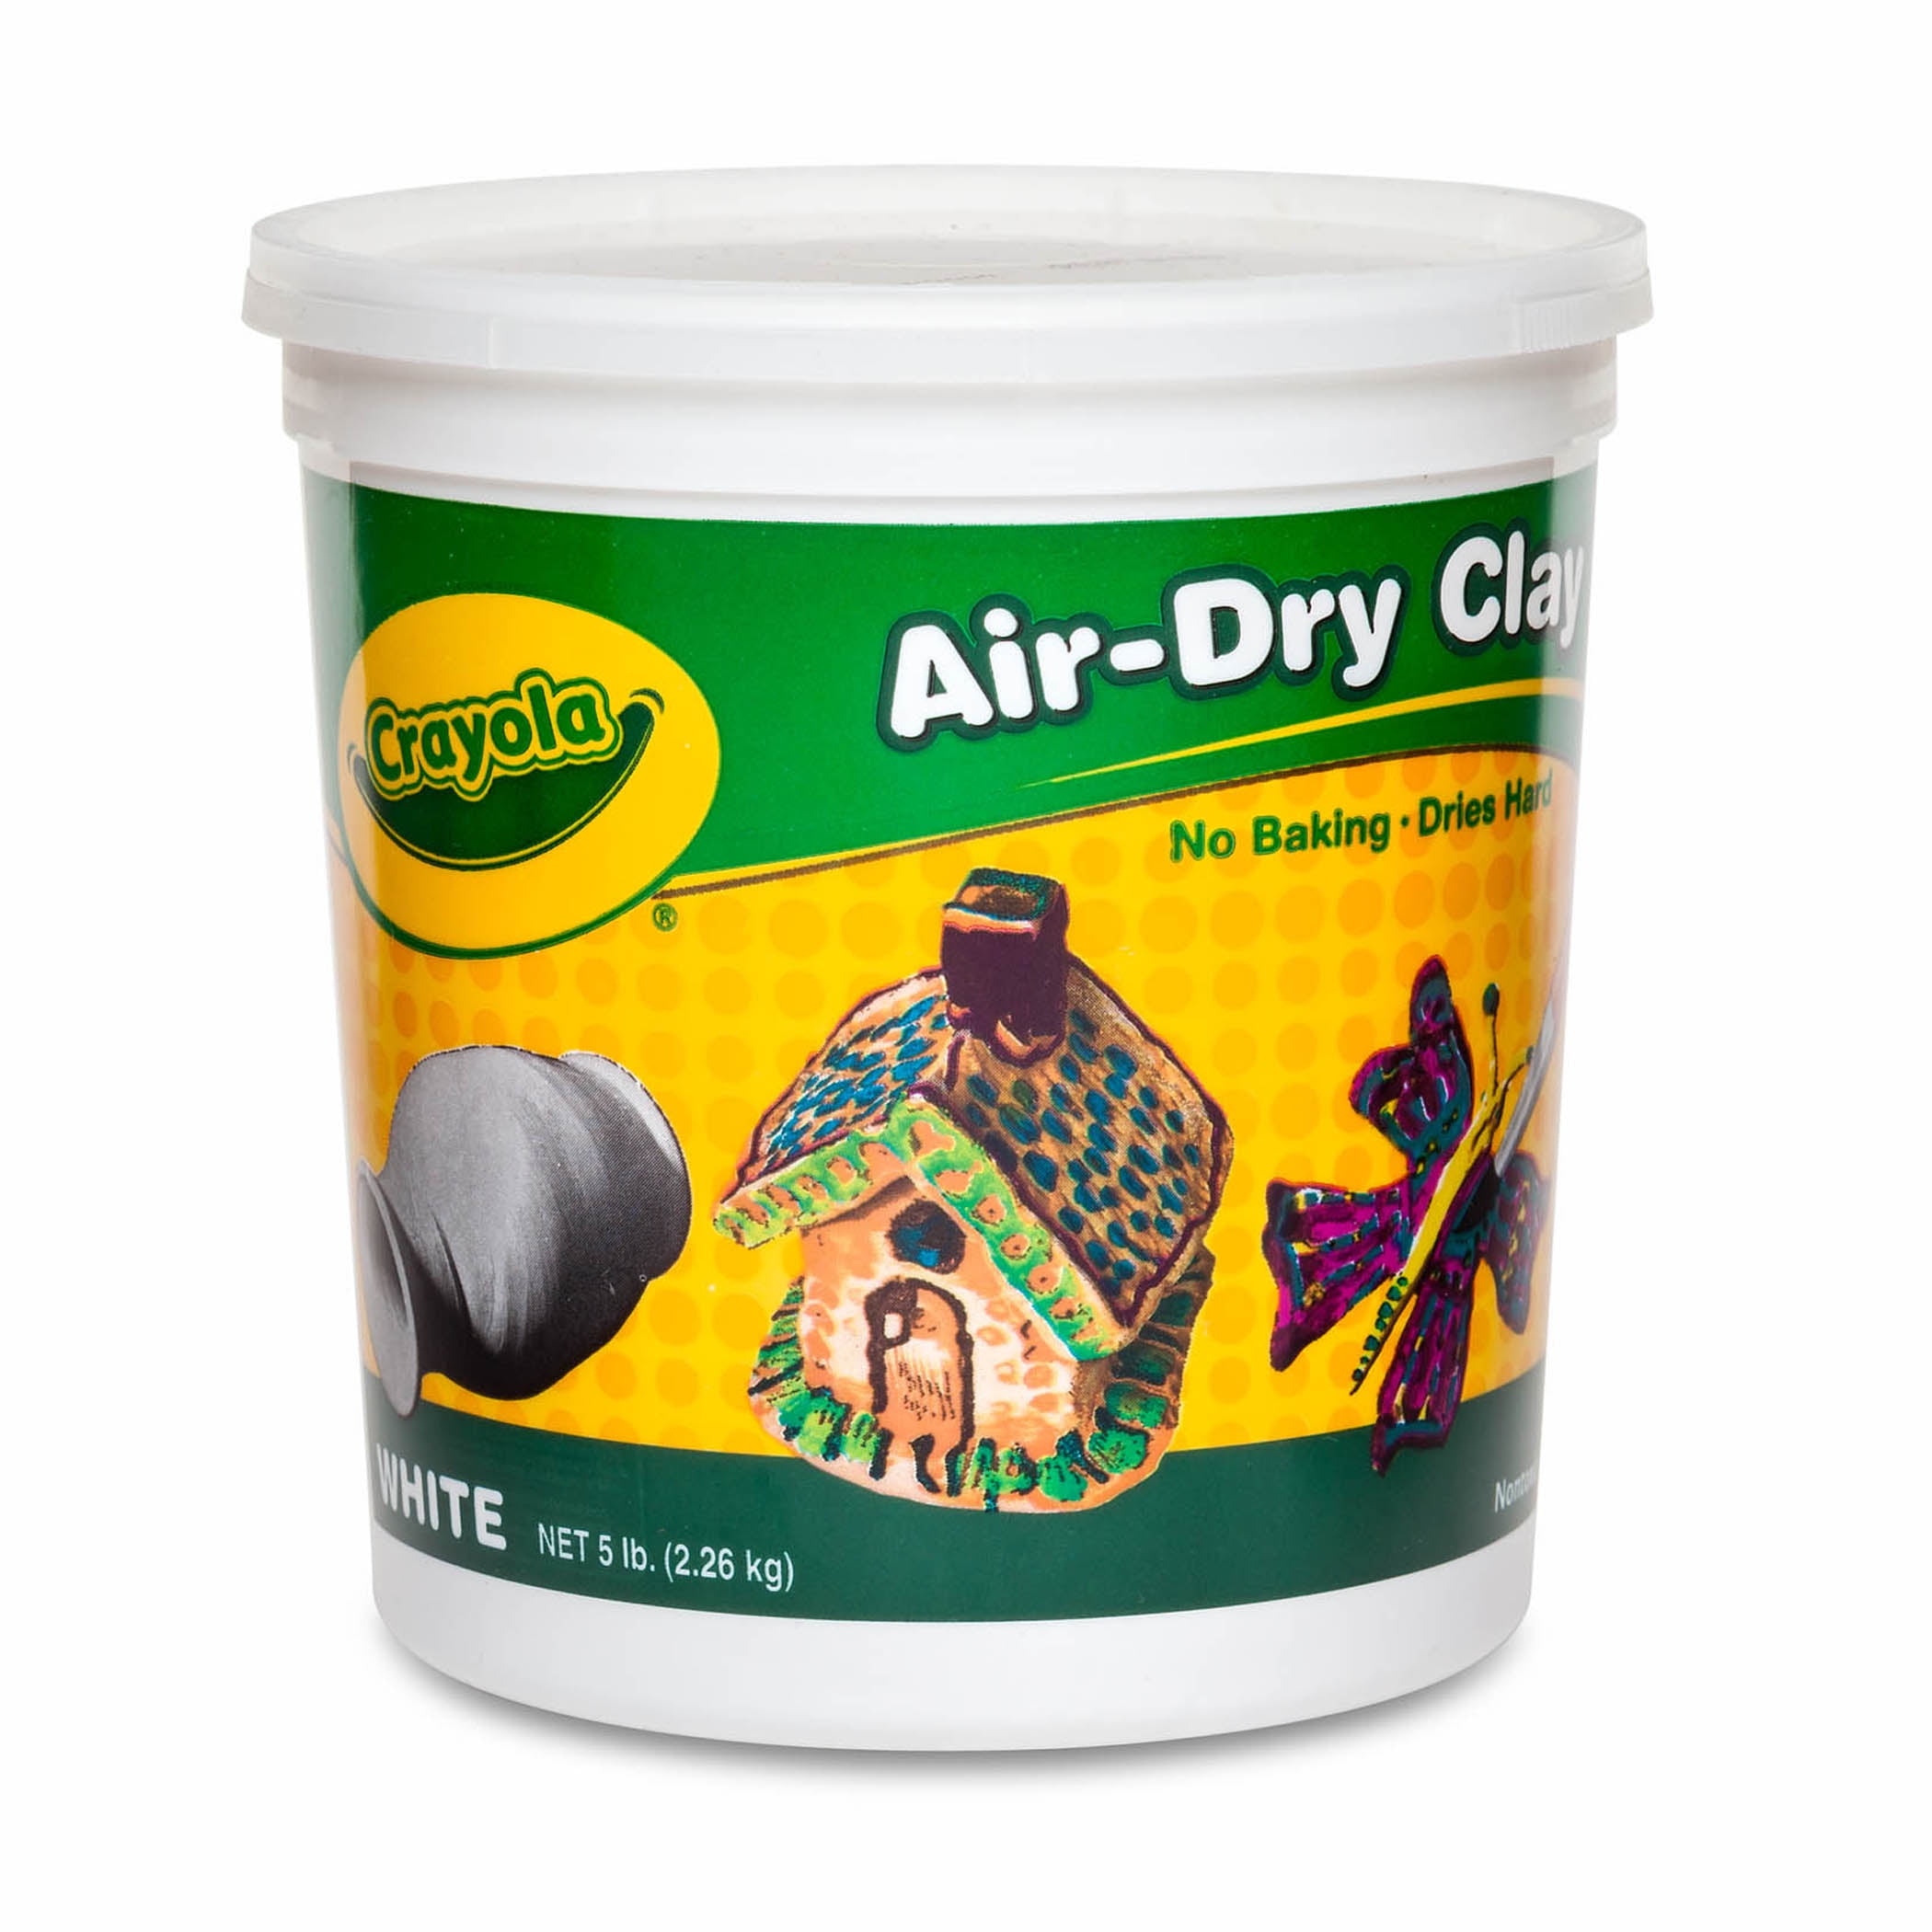 Details about   Crayola Air Dry Clay No Bake Clay Safe For Kids 25 Lbs White ART SUPPLIES 